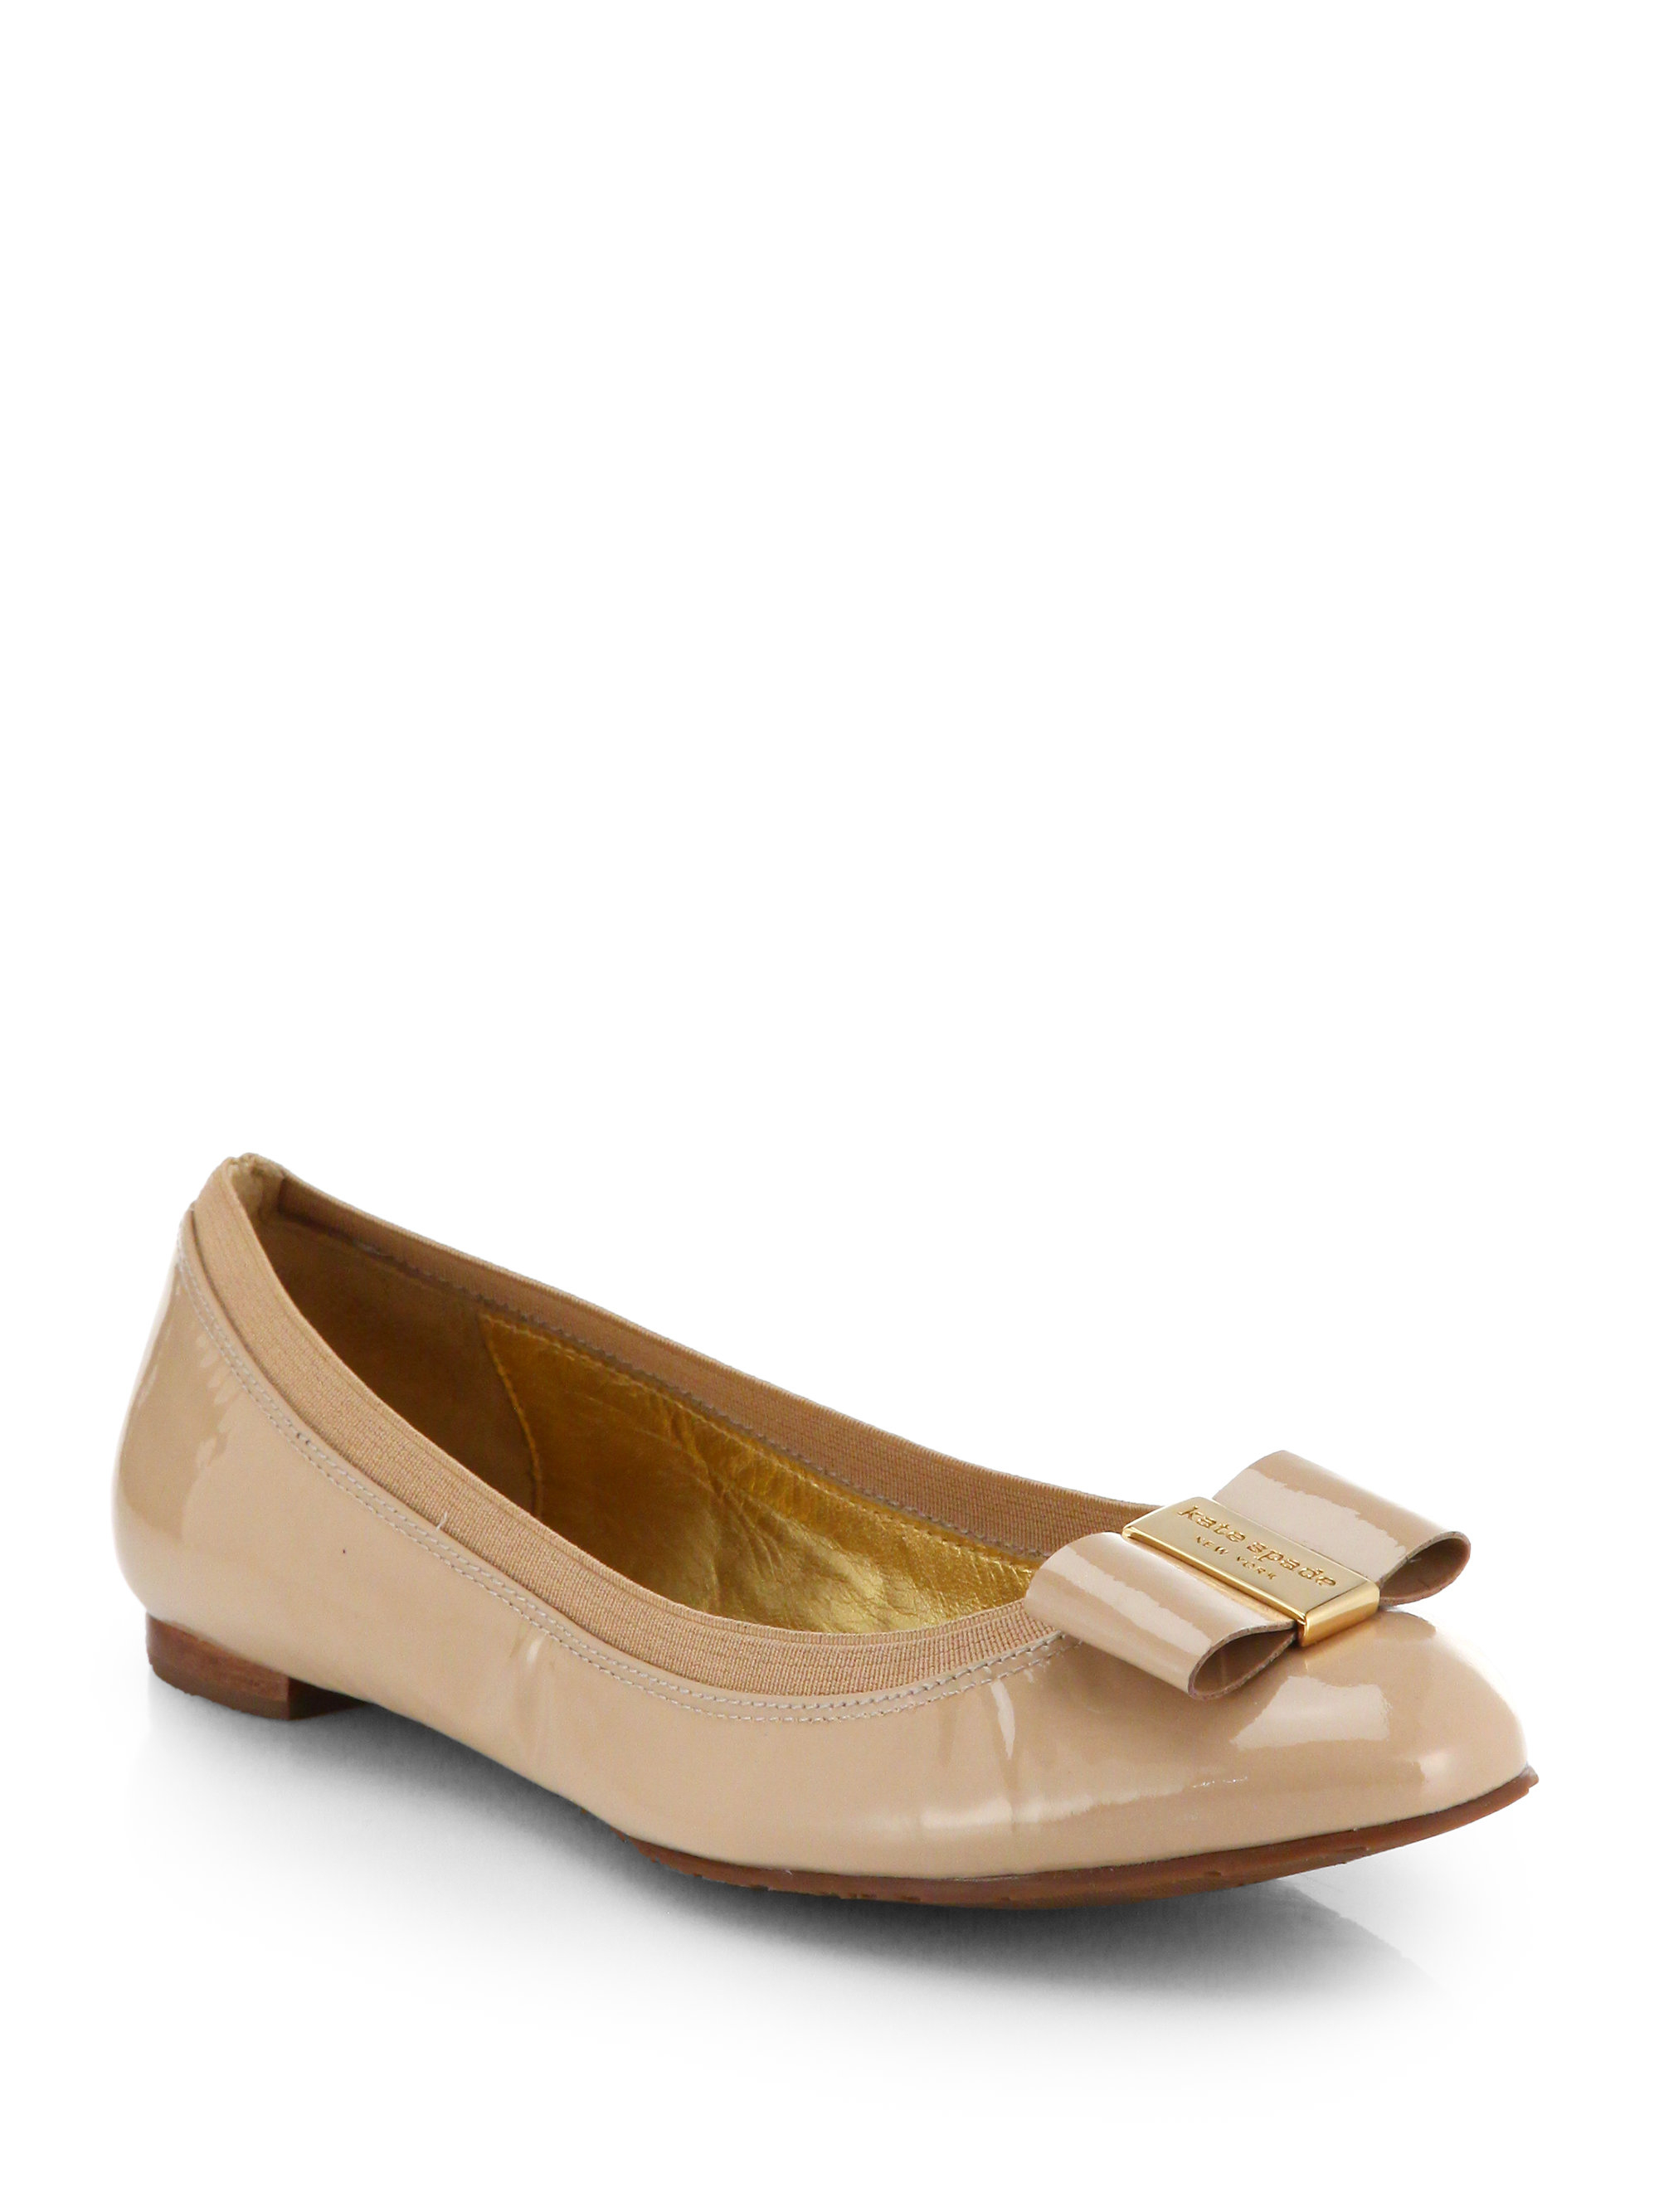 Kate Spade Tock Patent Leather Bow Ballet Flats in Natural | Lyst